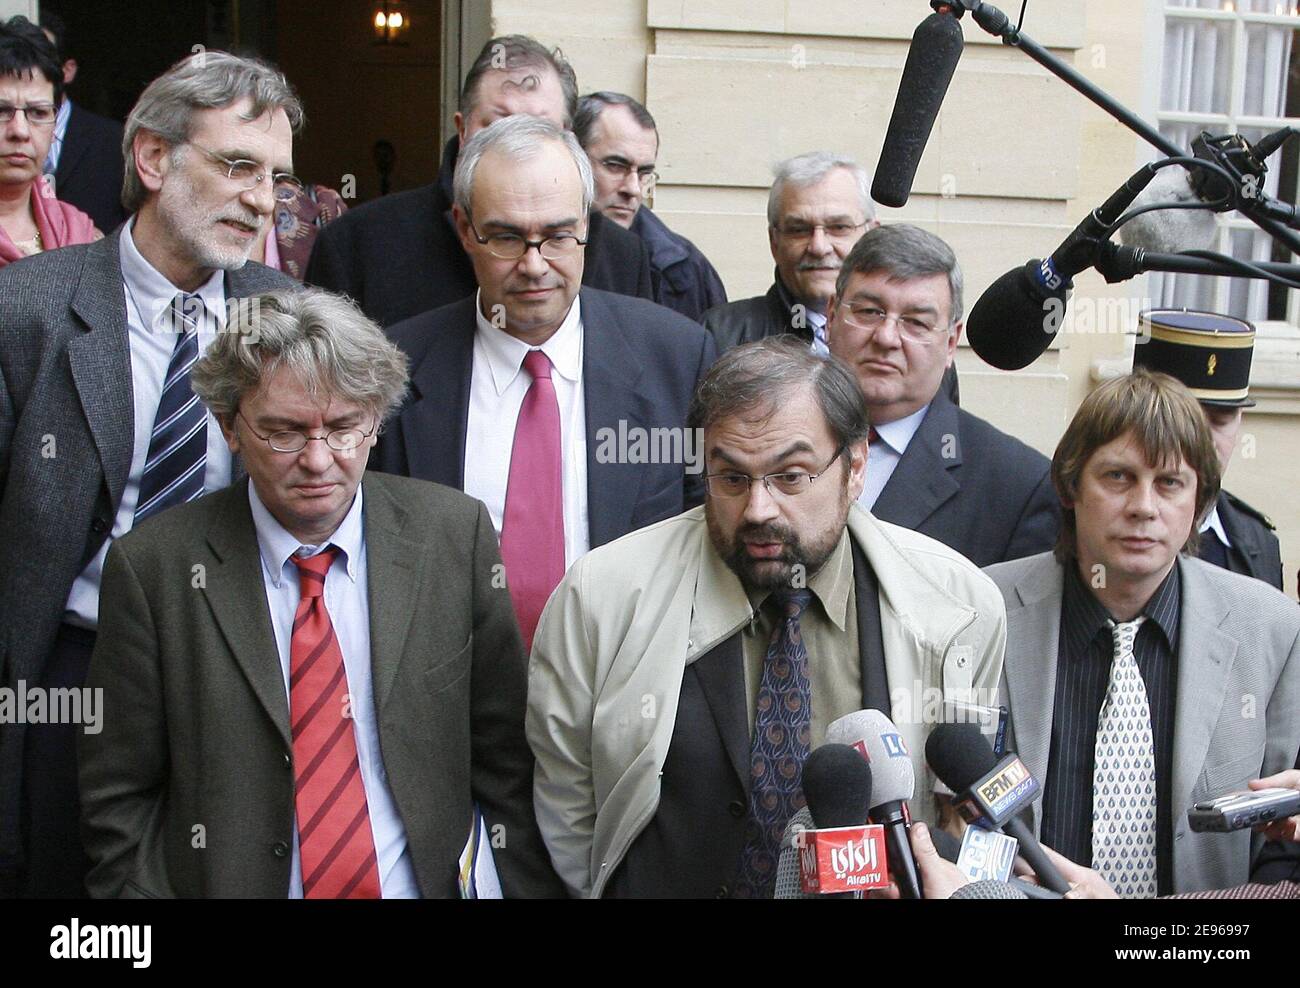 Unionists Bernard Thibault (CGT) (R), Francois Chereque (C), Jean-Claude Mailly (FO) (L), Jacques Voisin (2nd rowL) (CFTC), et Jean-Marc Icard (2nd Row C) (CFE-CGC) answer to journalists as they leave a meeting with French Prime Minister Dominique de Villepin in Paris, France, March 24, 2006. The prime minister met with unions for just over one hour, with both sides refusing to cede any ground. The unions say they will not hold talks with the government unless the law is revoked. De Villlepin has said he won't withdraw, suspend or change the law.. Photo by Mehdi Taamallah/ABACAPRESS.COM Stock Photo